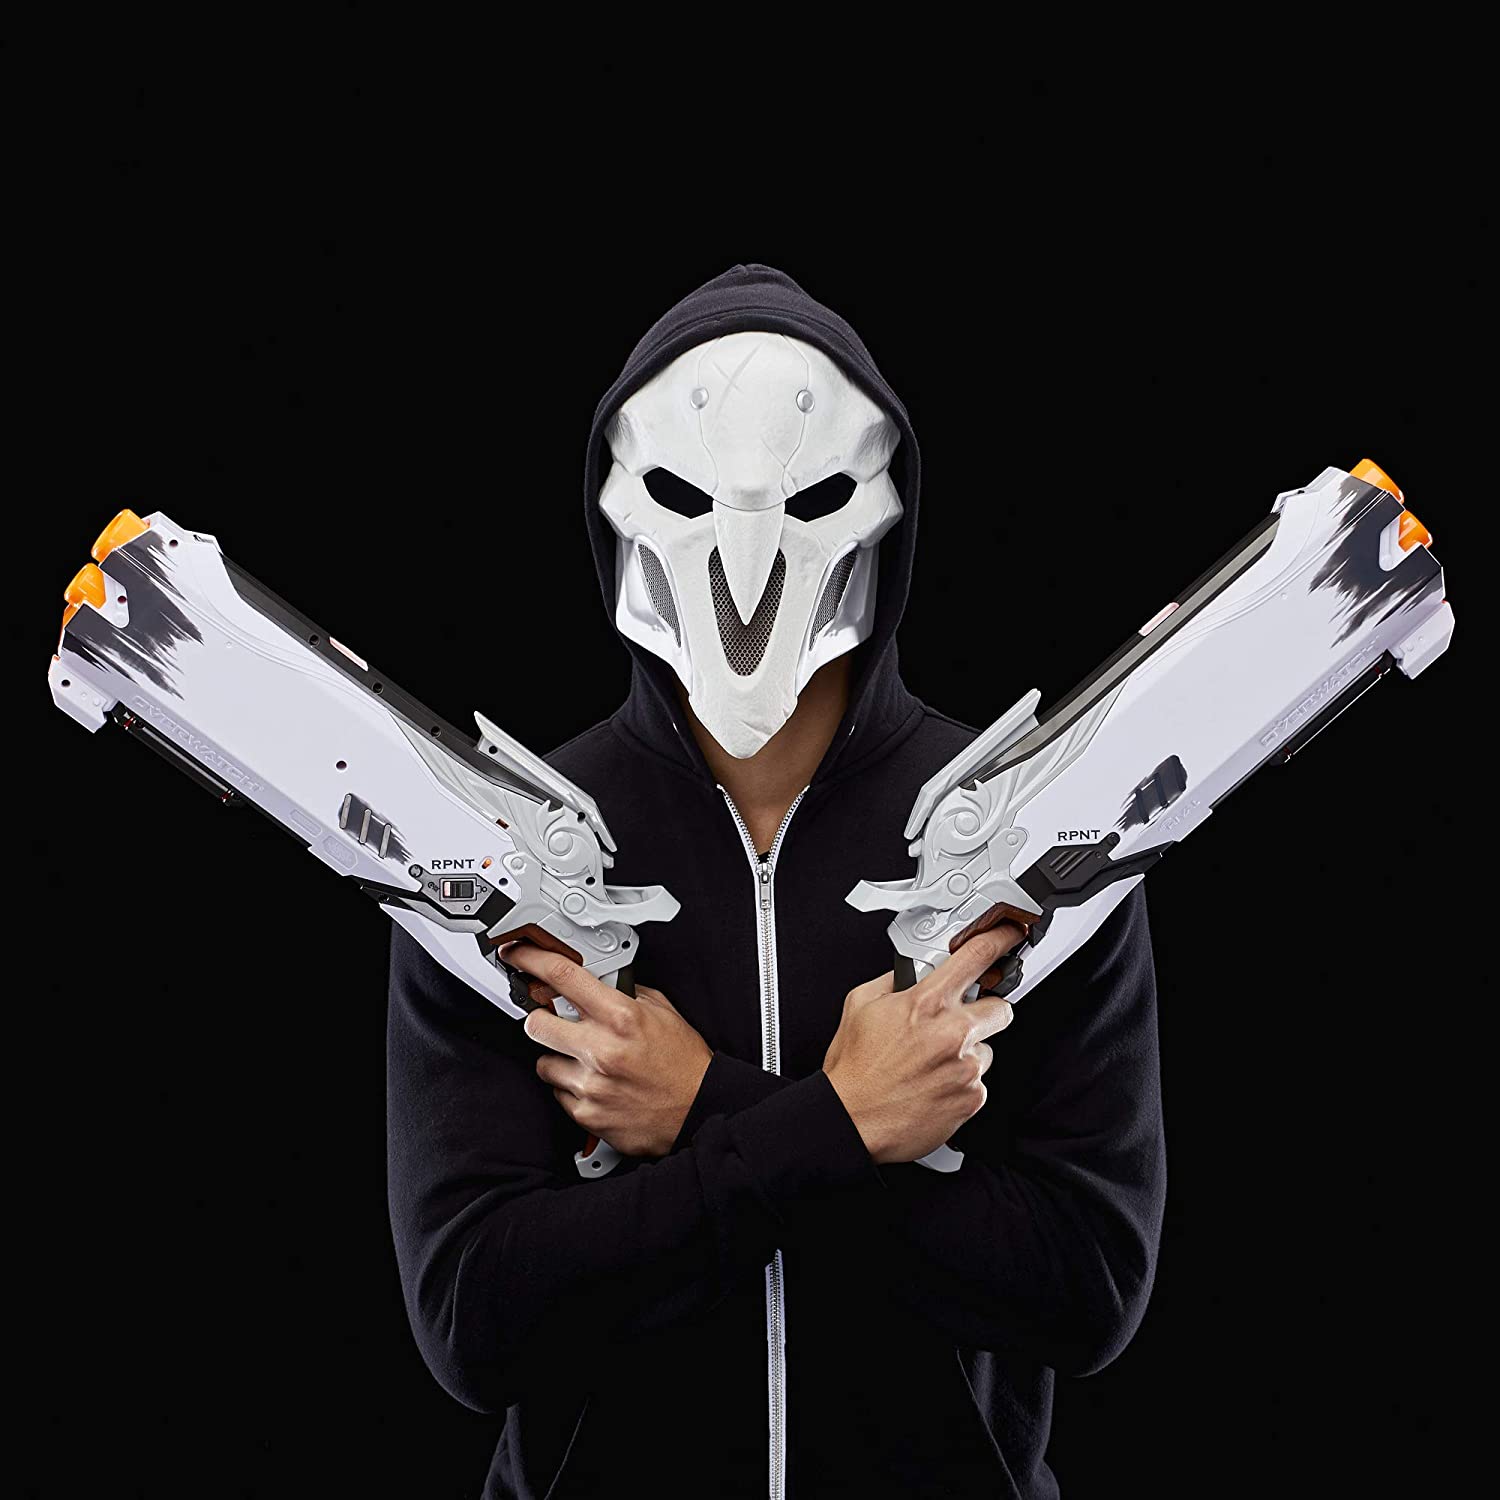 Overwatch Reaper (Wight Edition) Collector Pack with 2 Nerf Rival Blasters 1 Reaper Face Mask and 16 Overwatch Nerf Rival Rounds